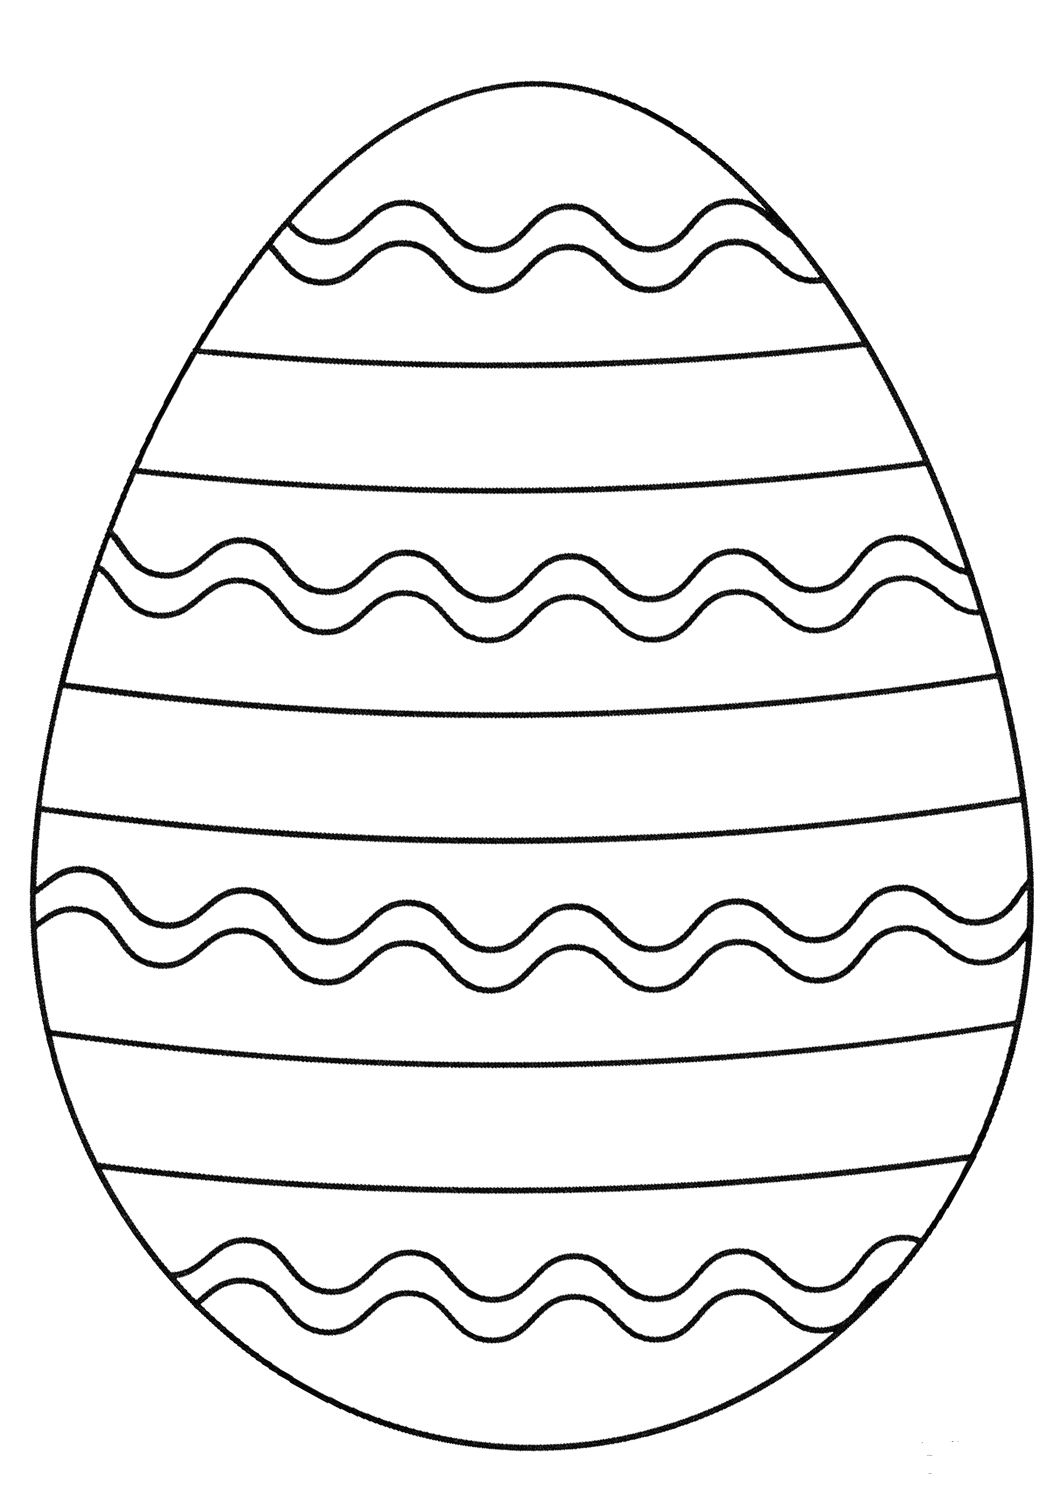 Easter Egg Coloring Page For Preschoolers